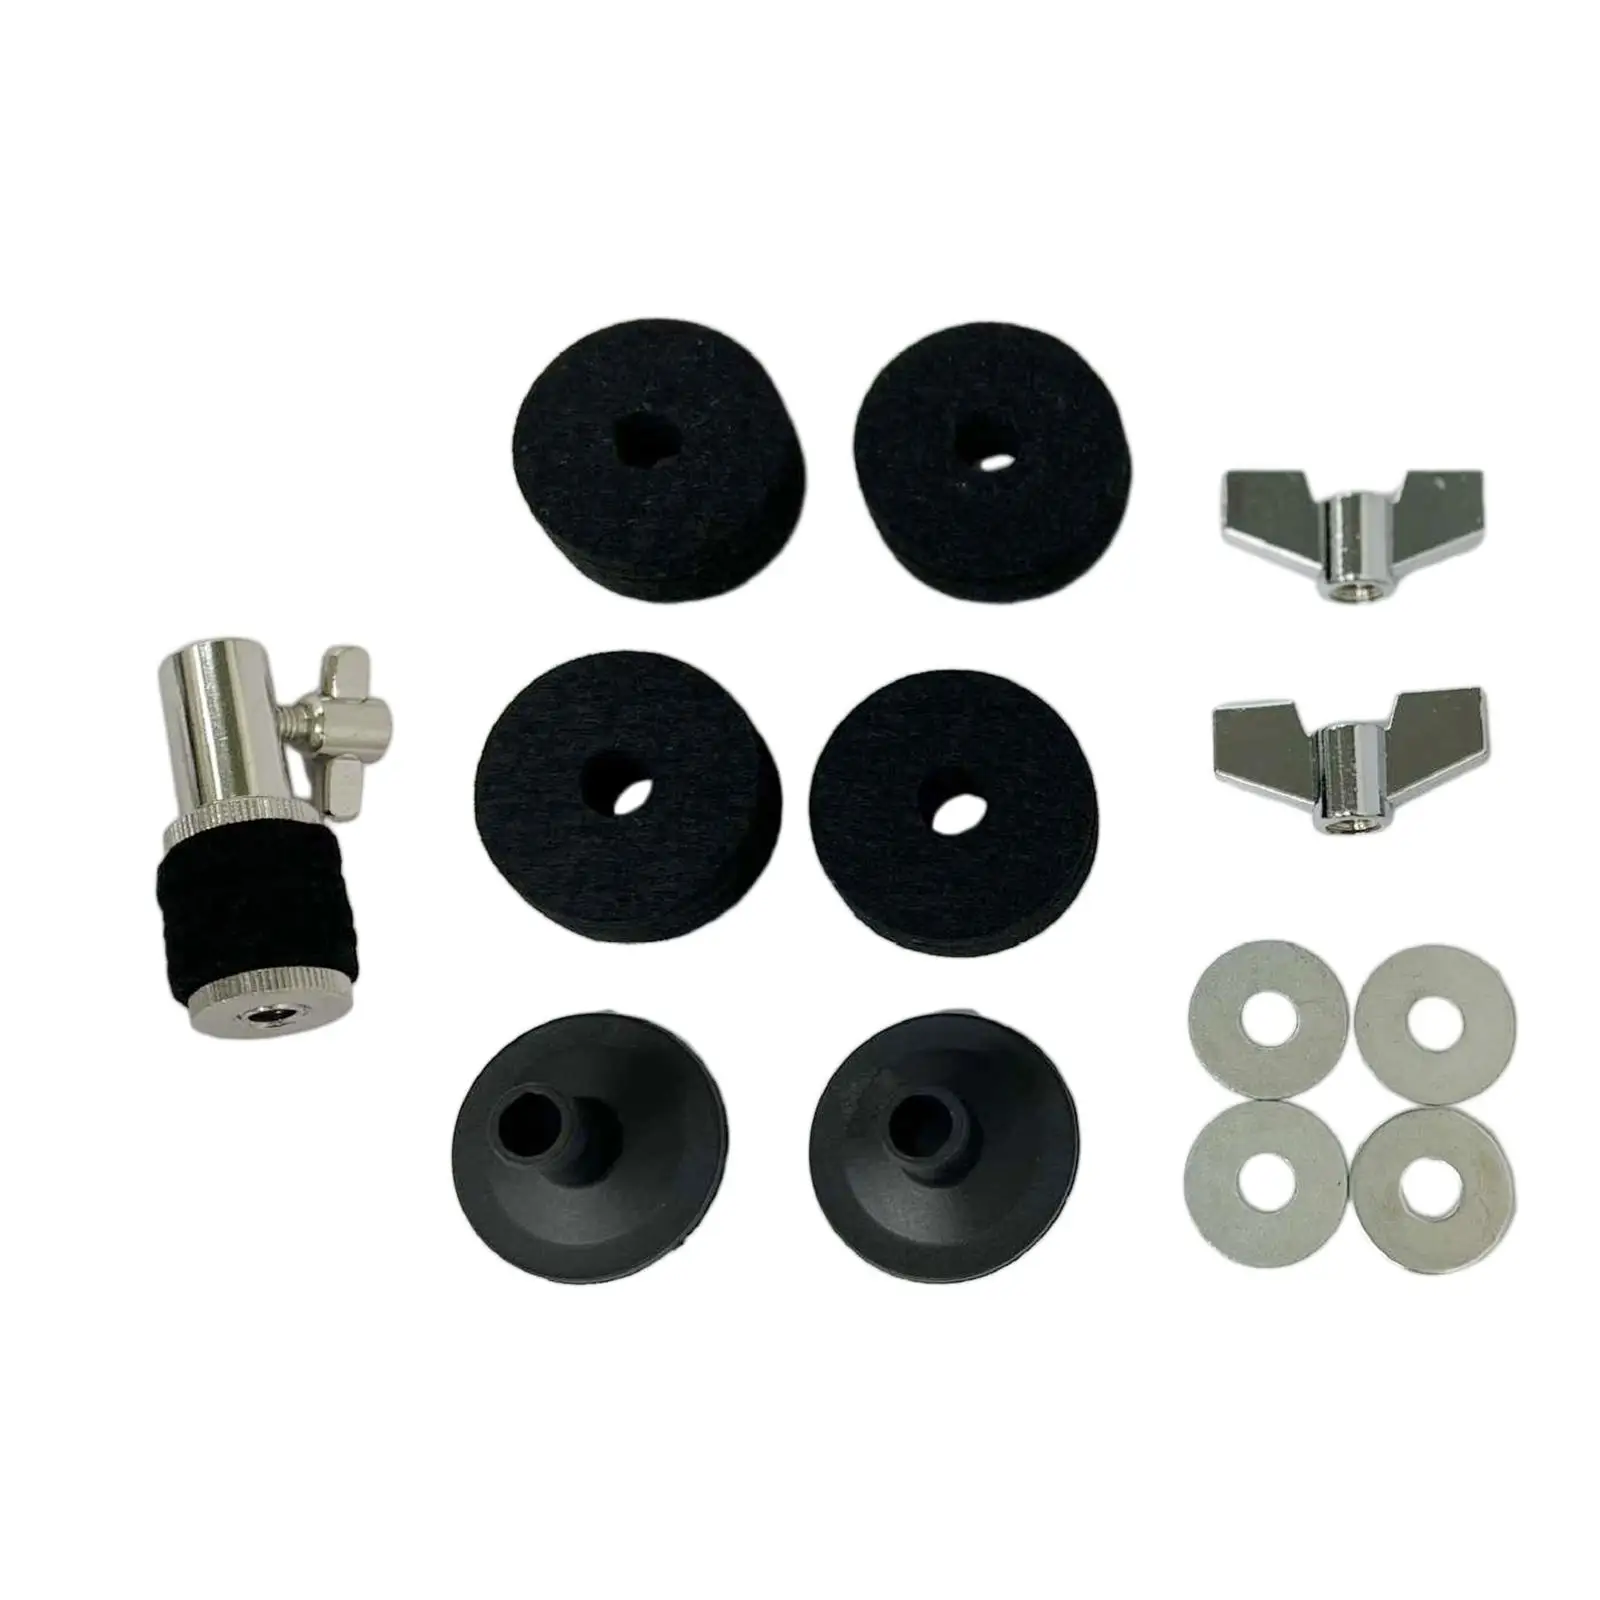 13x Drum Replacement Parts for Drum Set Drum Hardware Drum Cymbal Felt Pads Cymbal Sleeve for Percussion Instrument Parts